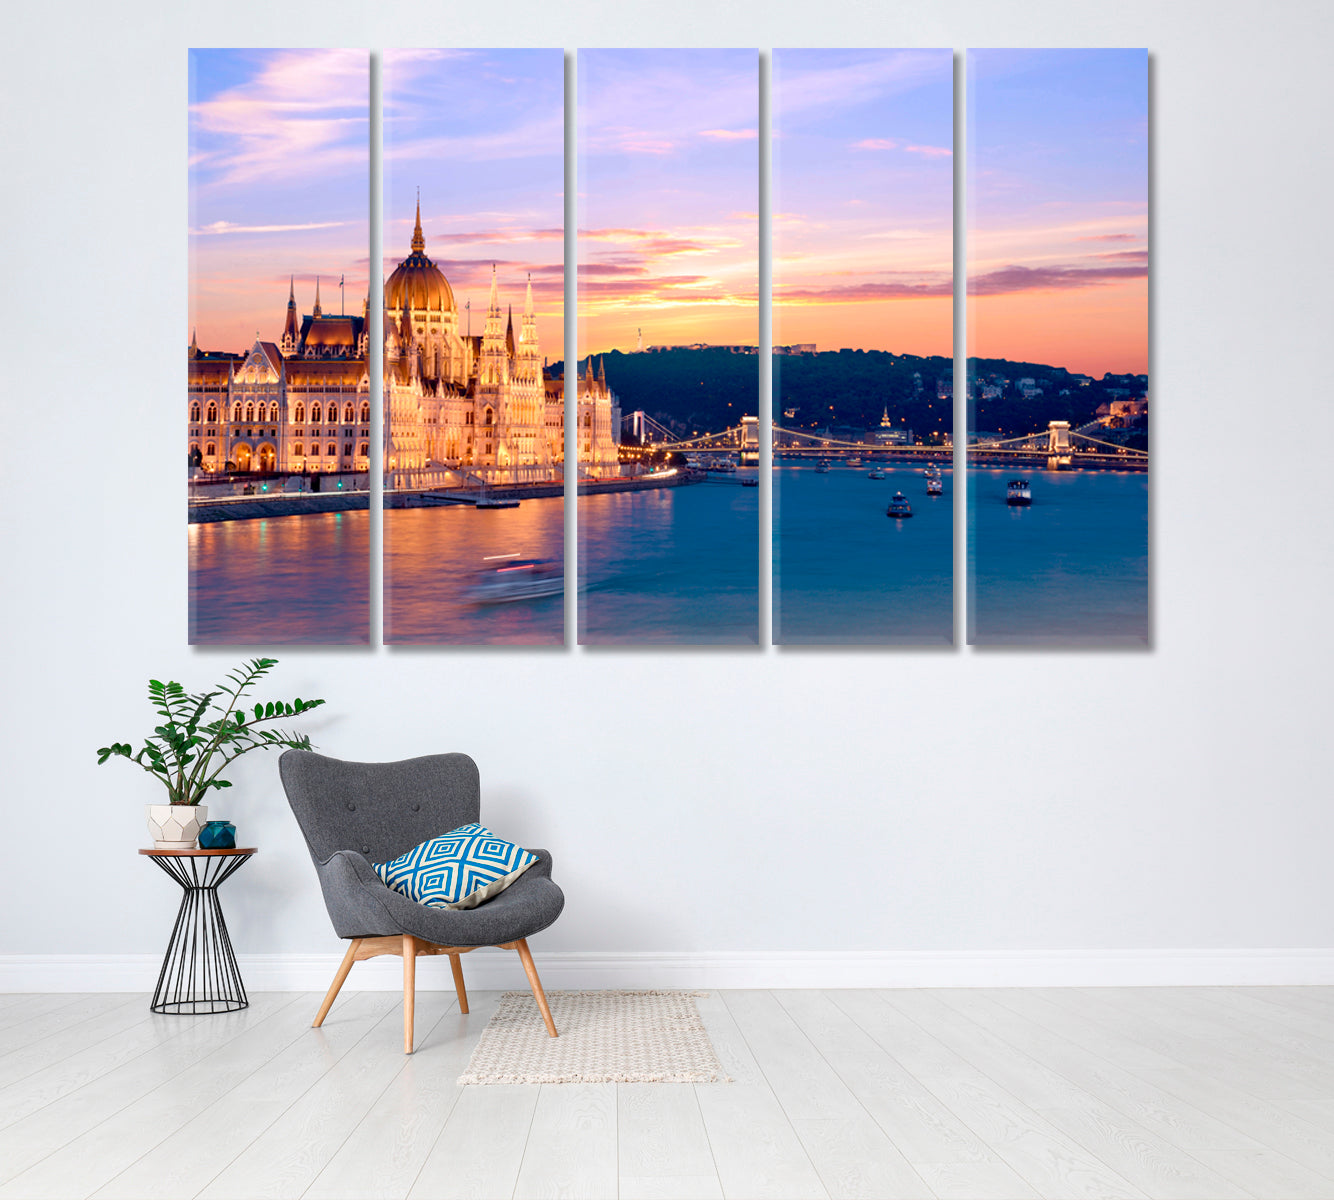 Colorful Sunset in Budapest Canvas Print ArtLexy 5 Panels 36"x24" inches 